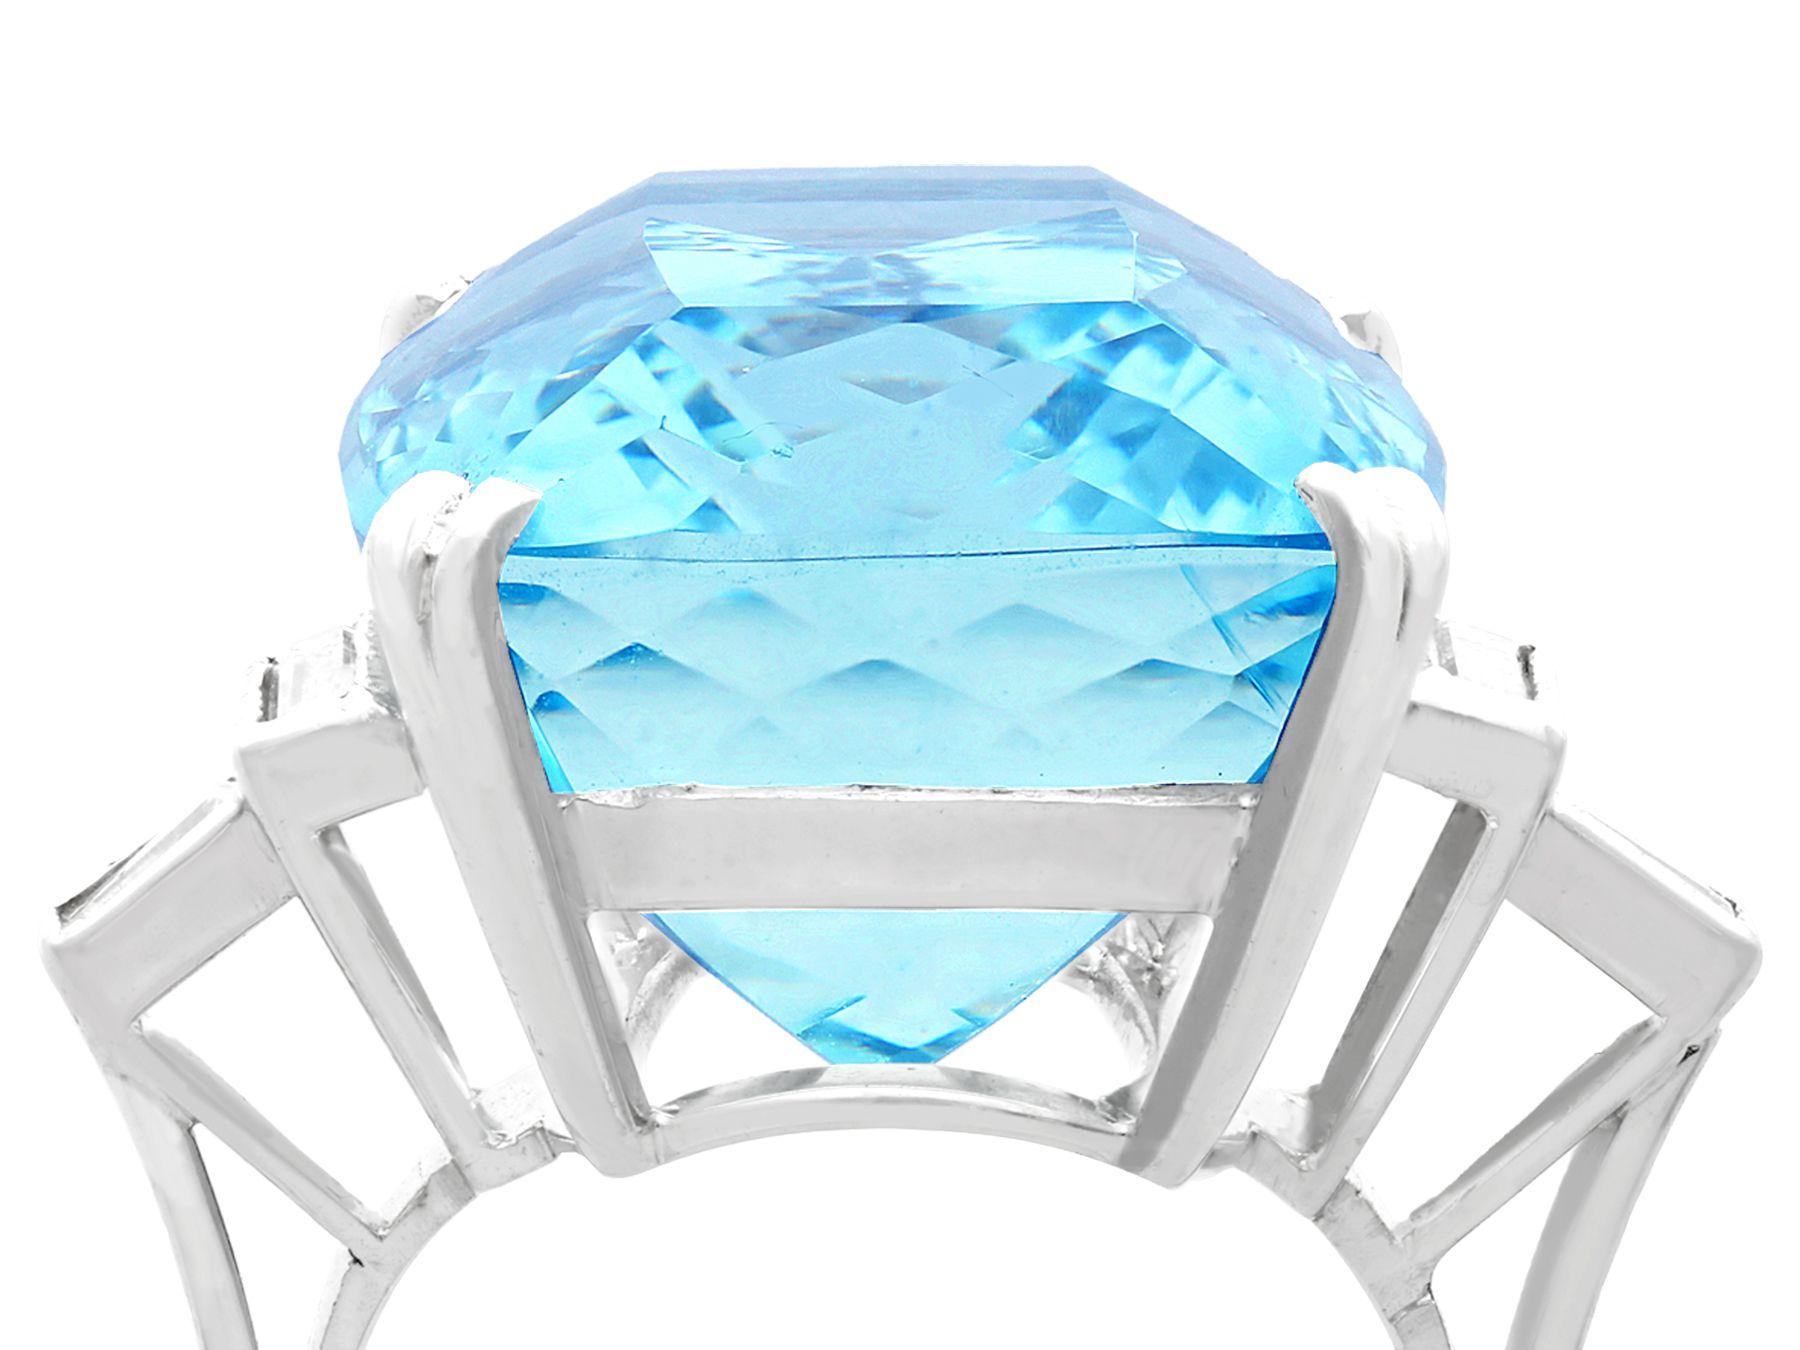 A stunning vintage 45.09 carat aquamarine and 0.96 carat diamond, 18 karat white gold cocktail ring; part of our diverse gemstone jewelry and estate jewelry collections.

This stunning, fine and impressive vintage aquamarine ring has been crafted in